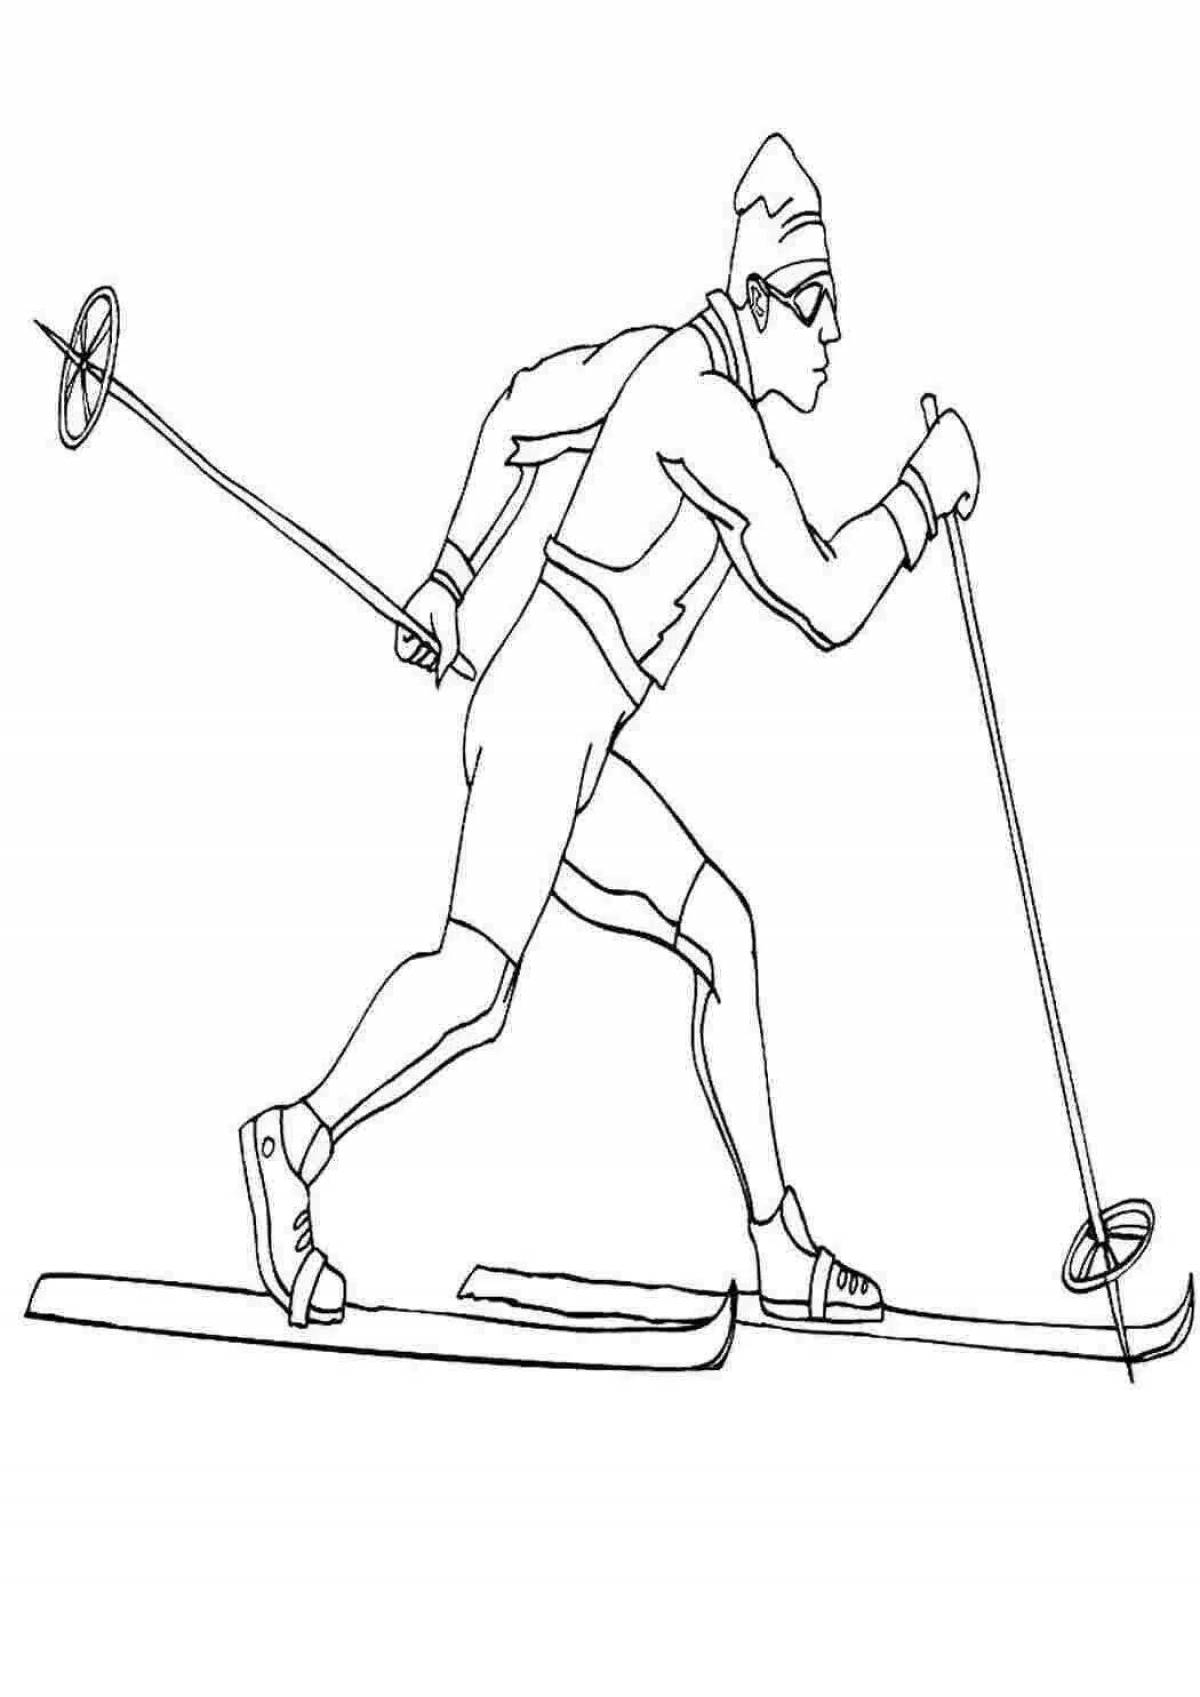 Fabulous skiing sports coloring book